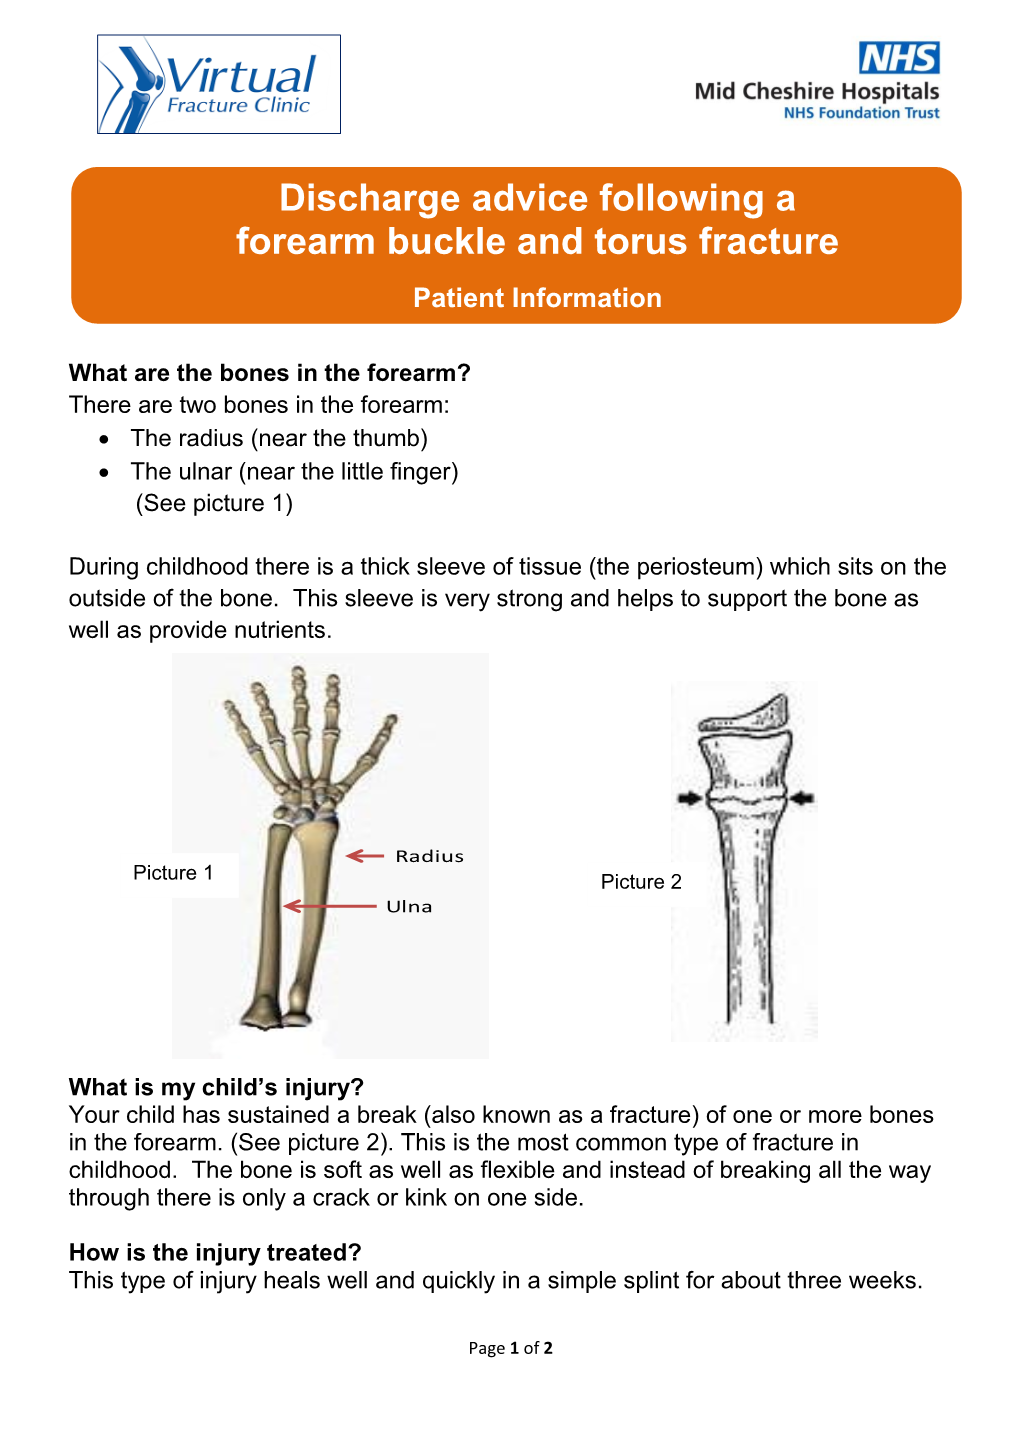 Discharge Advice Following a Forearm Buckle and Torus Fracture